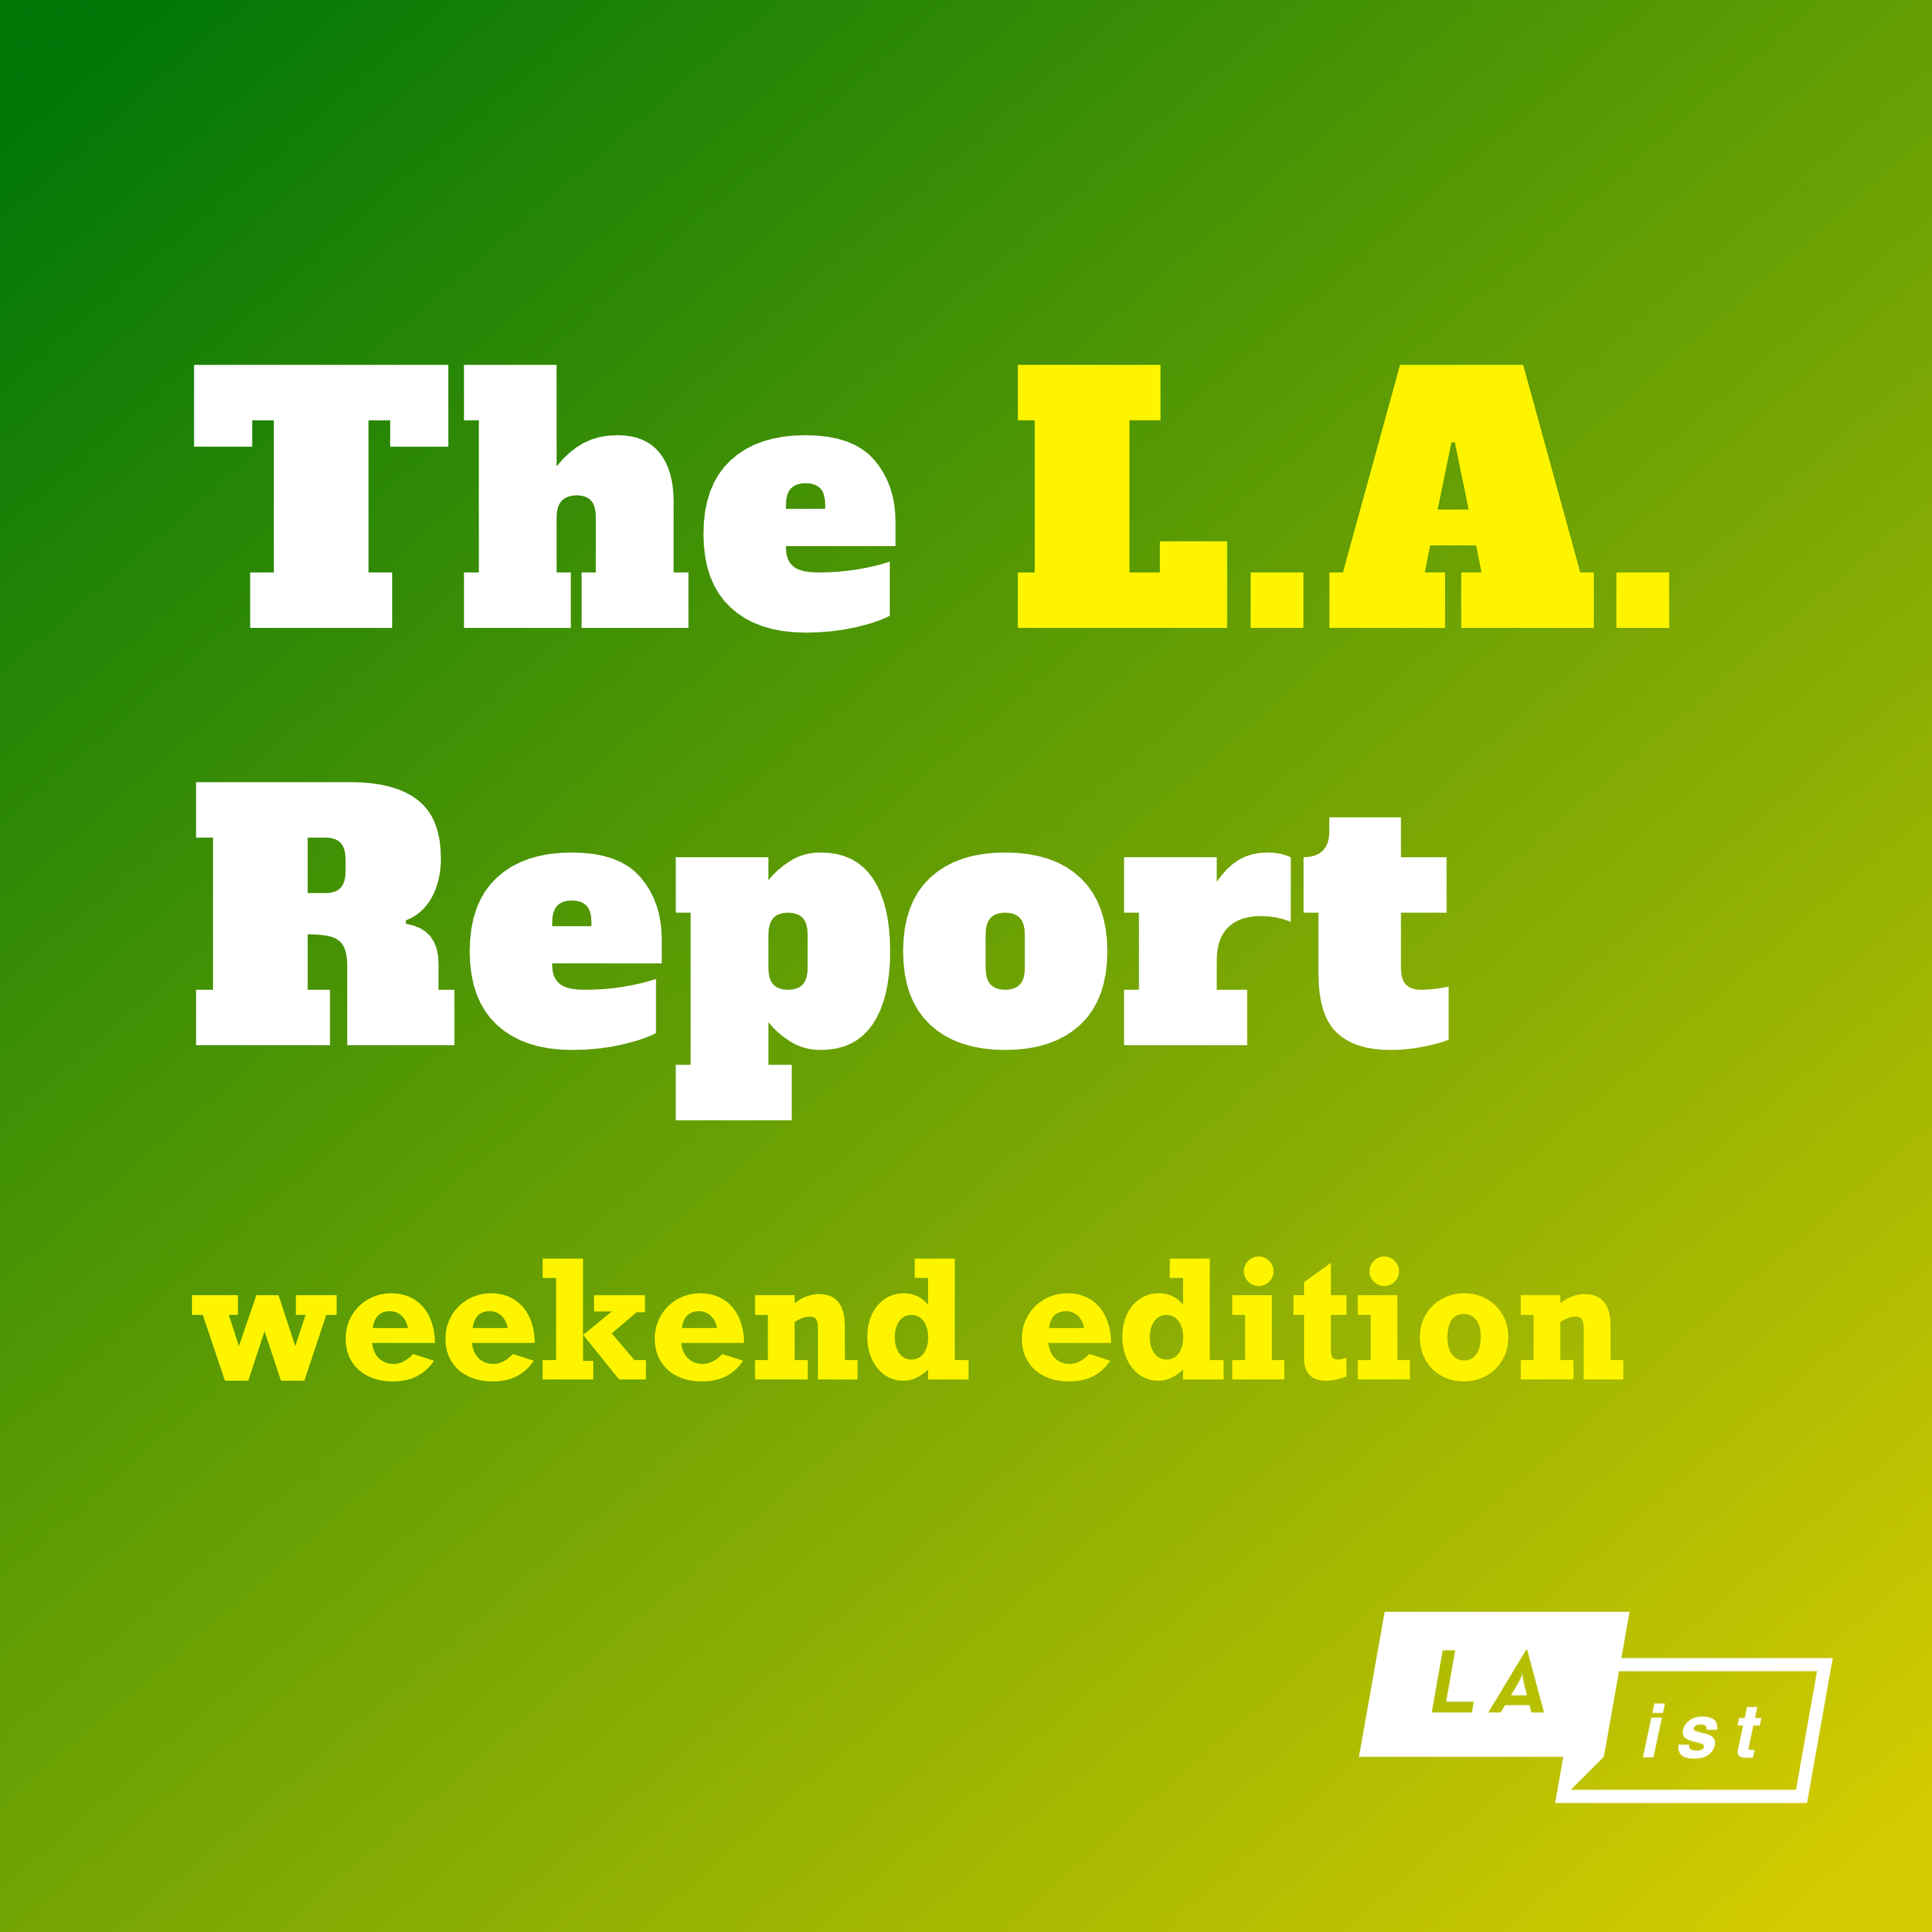 New Styrofoam Ban In LA, Healthcare Costs To Be Capped, Tenants Protest For More Rent Control— The Saturday Edition